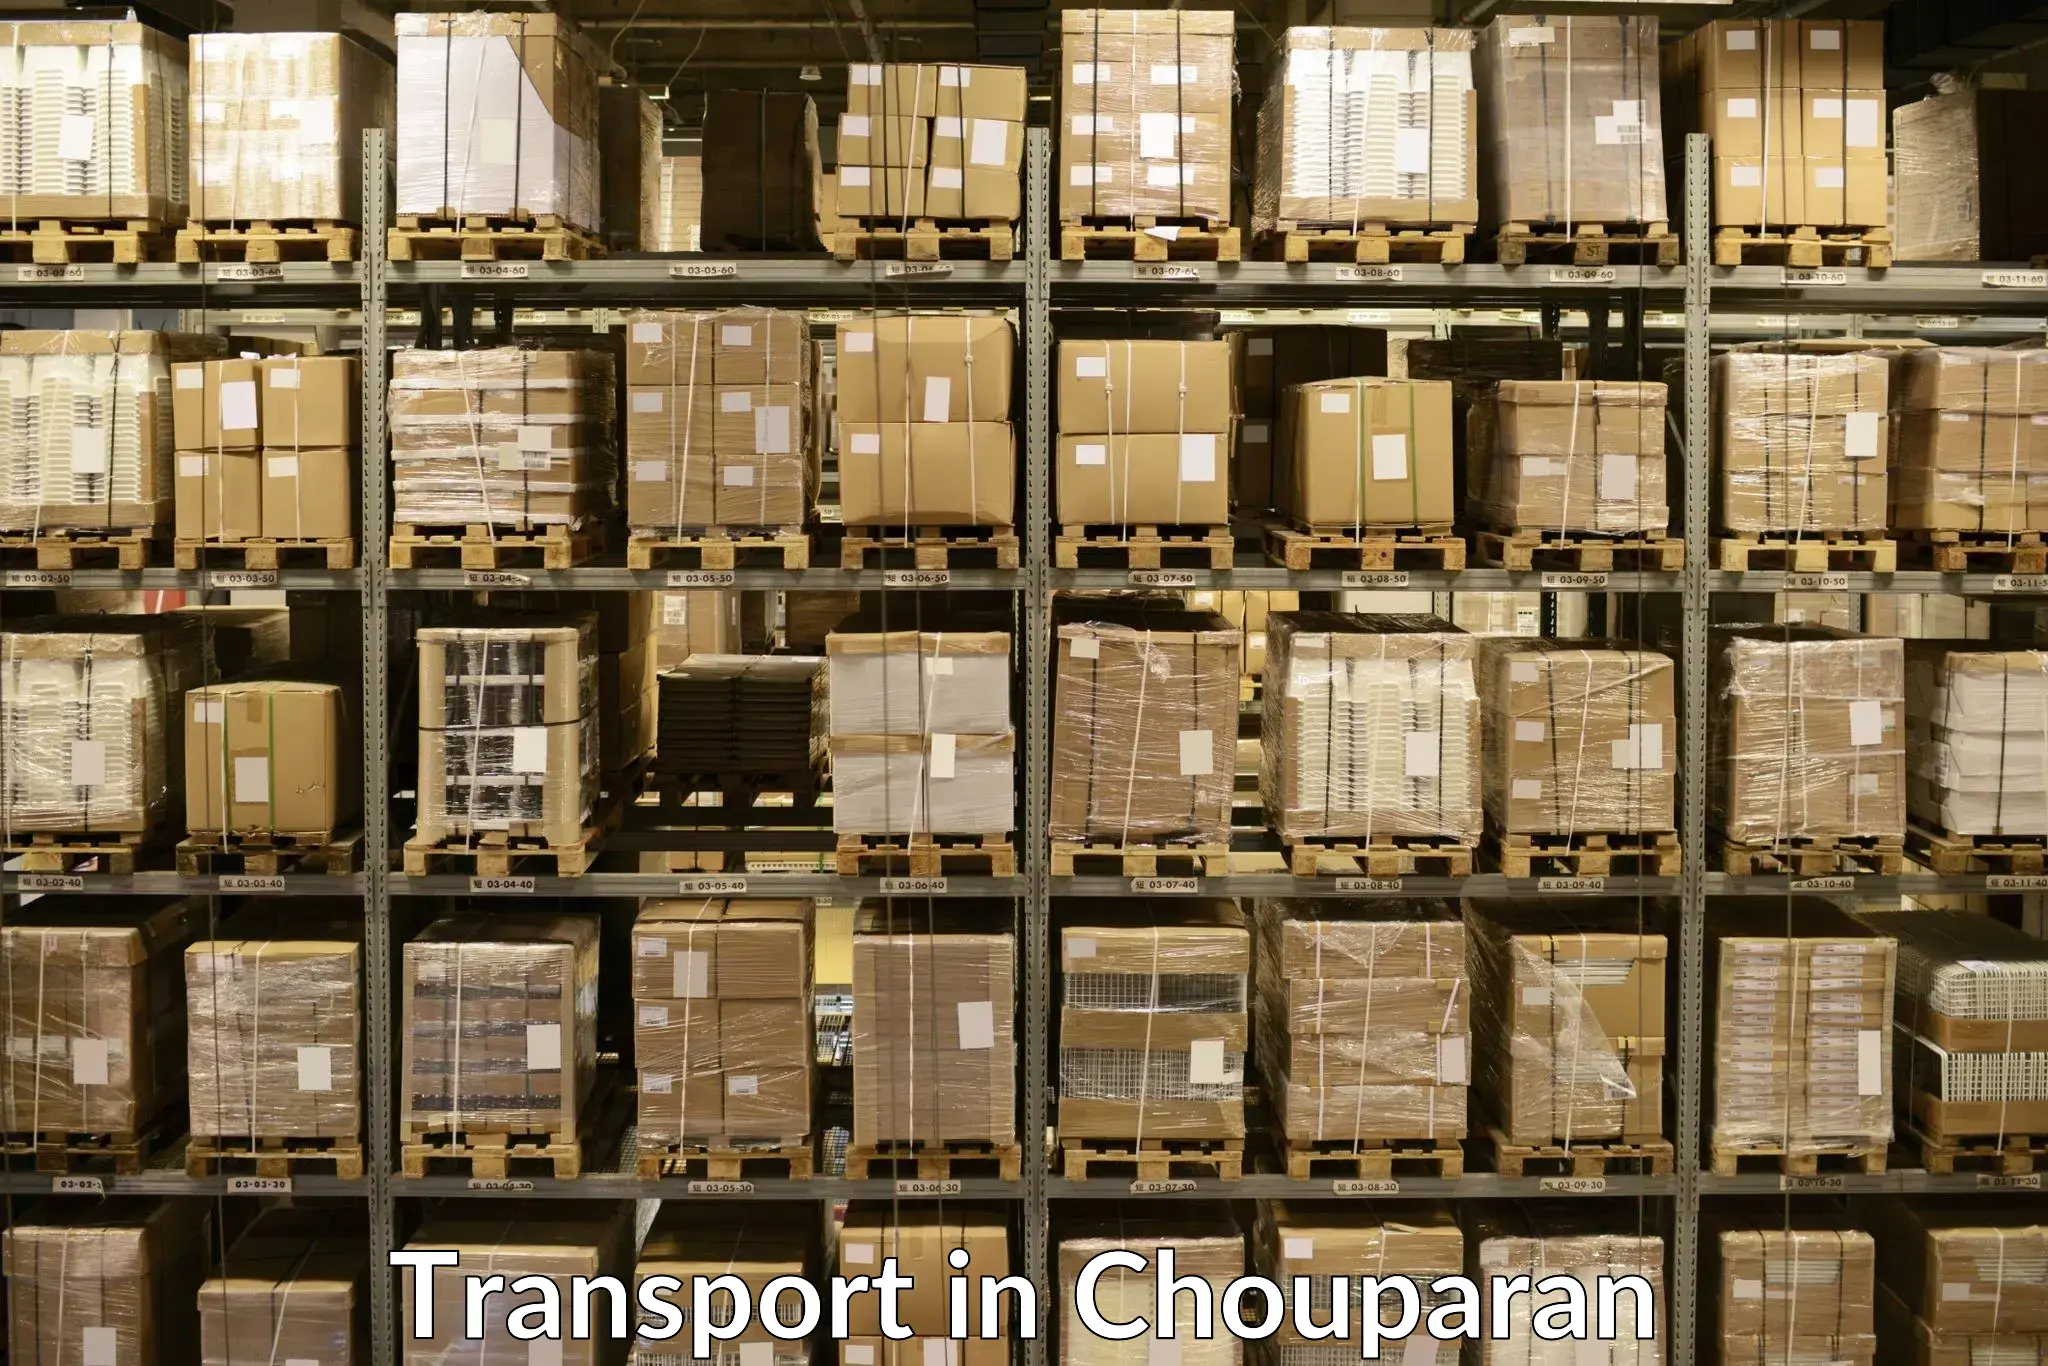 Vehicle transport services in Chouparan